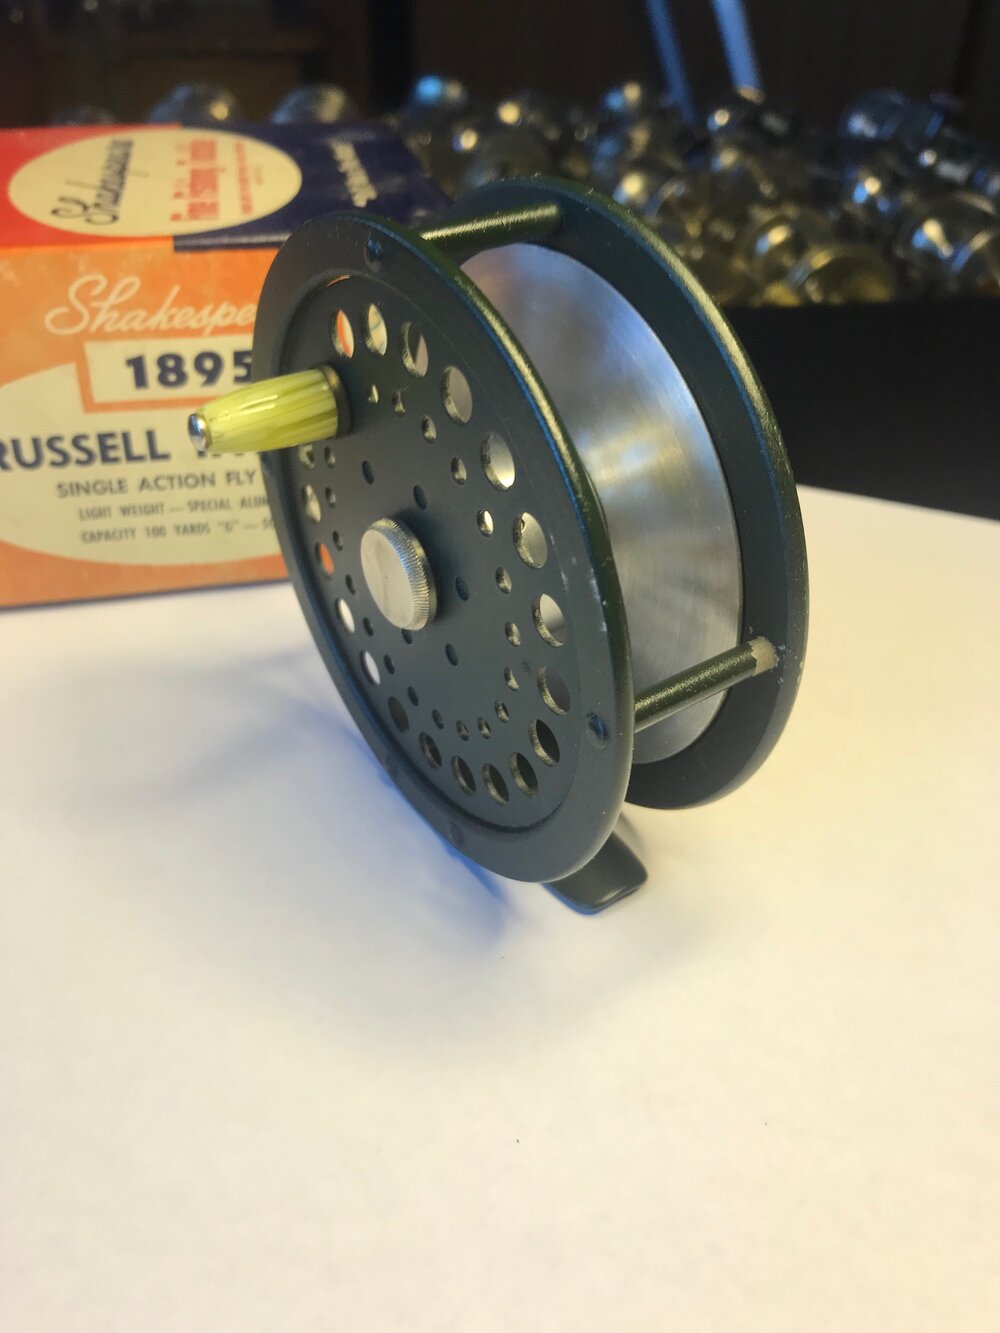 Shakespeare RUSSELL INTRINSIC No. 1895 Model GE Fly Reel with